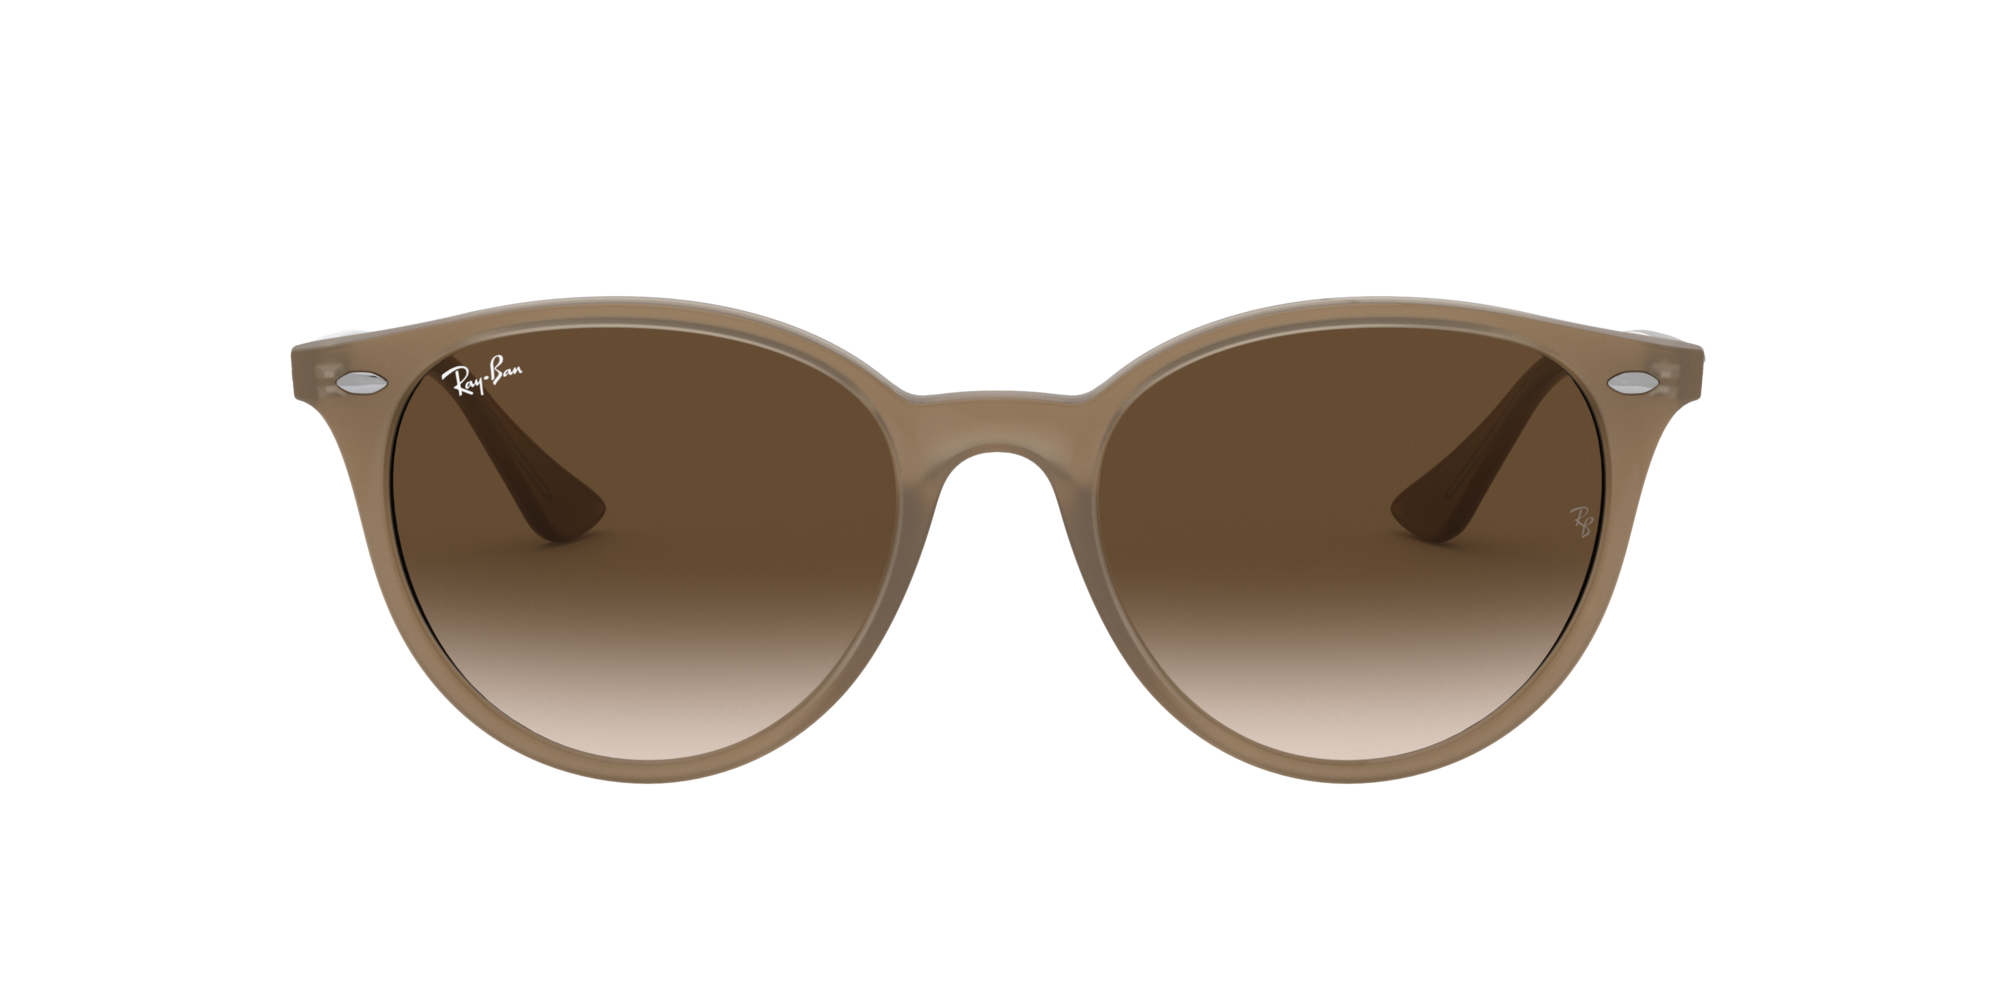 Ray Ban Sonnenbrille in Beige RB4305 616613 53